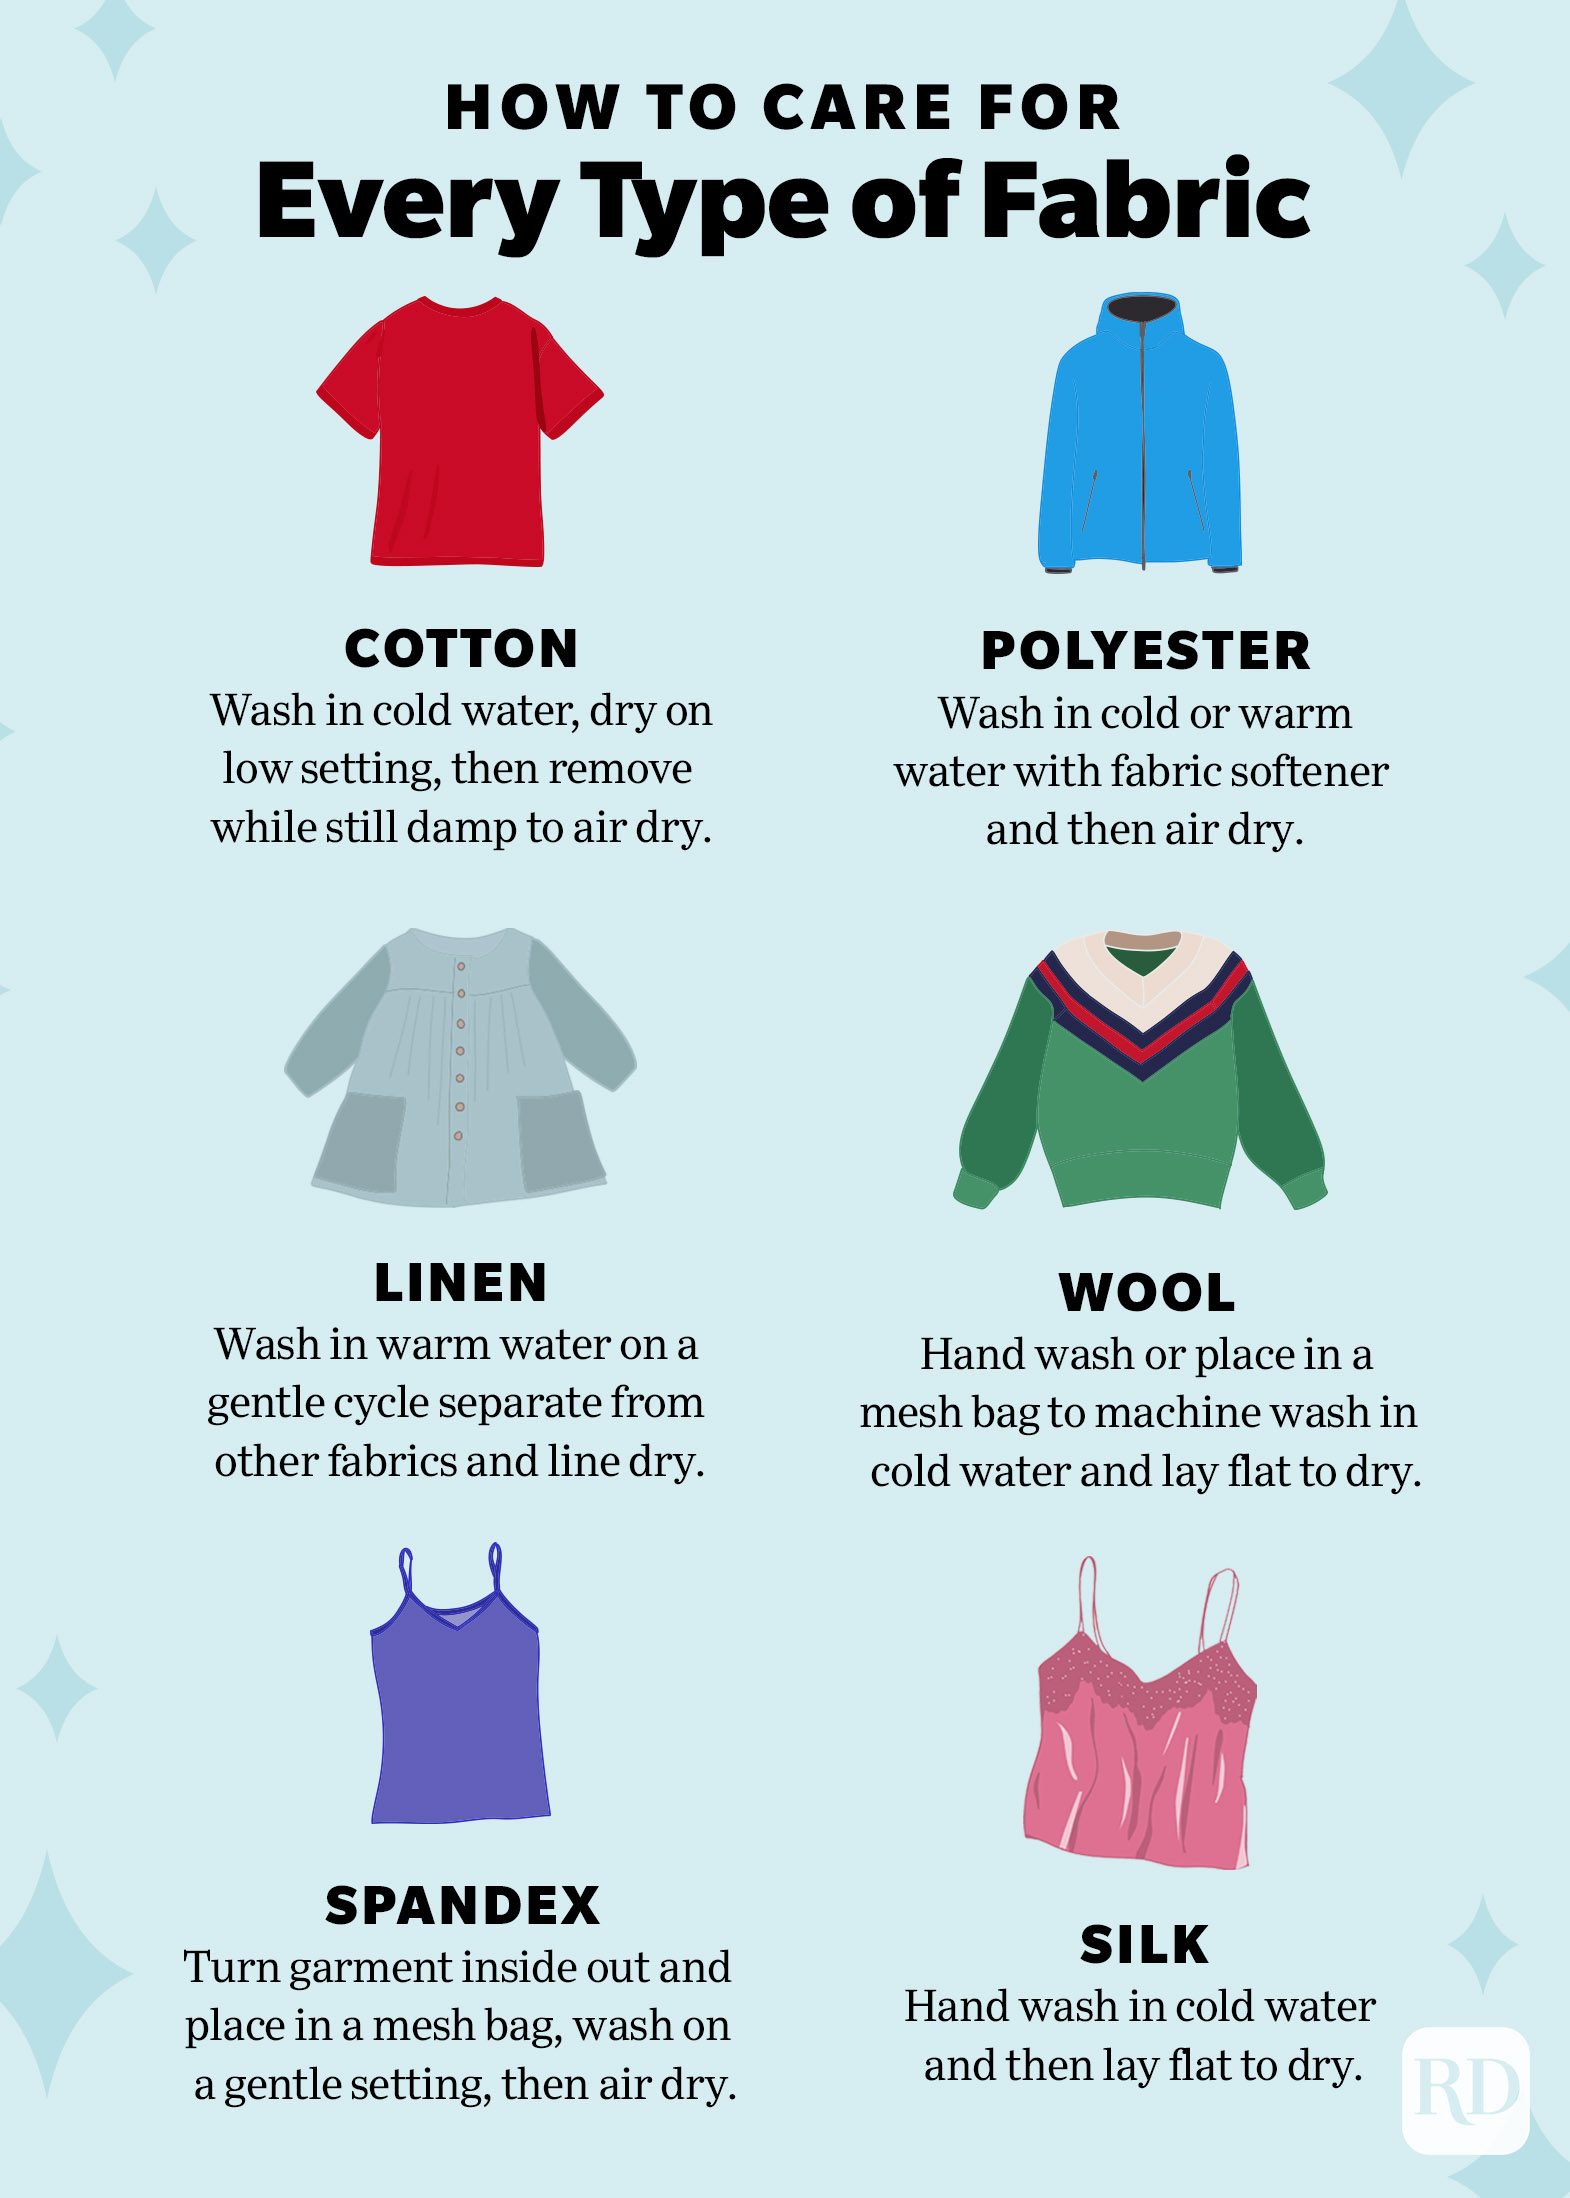 How to Do Laundry - How to Wash Clothes Step-by-Step